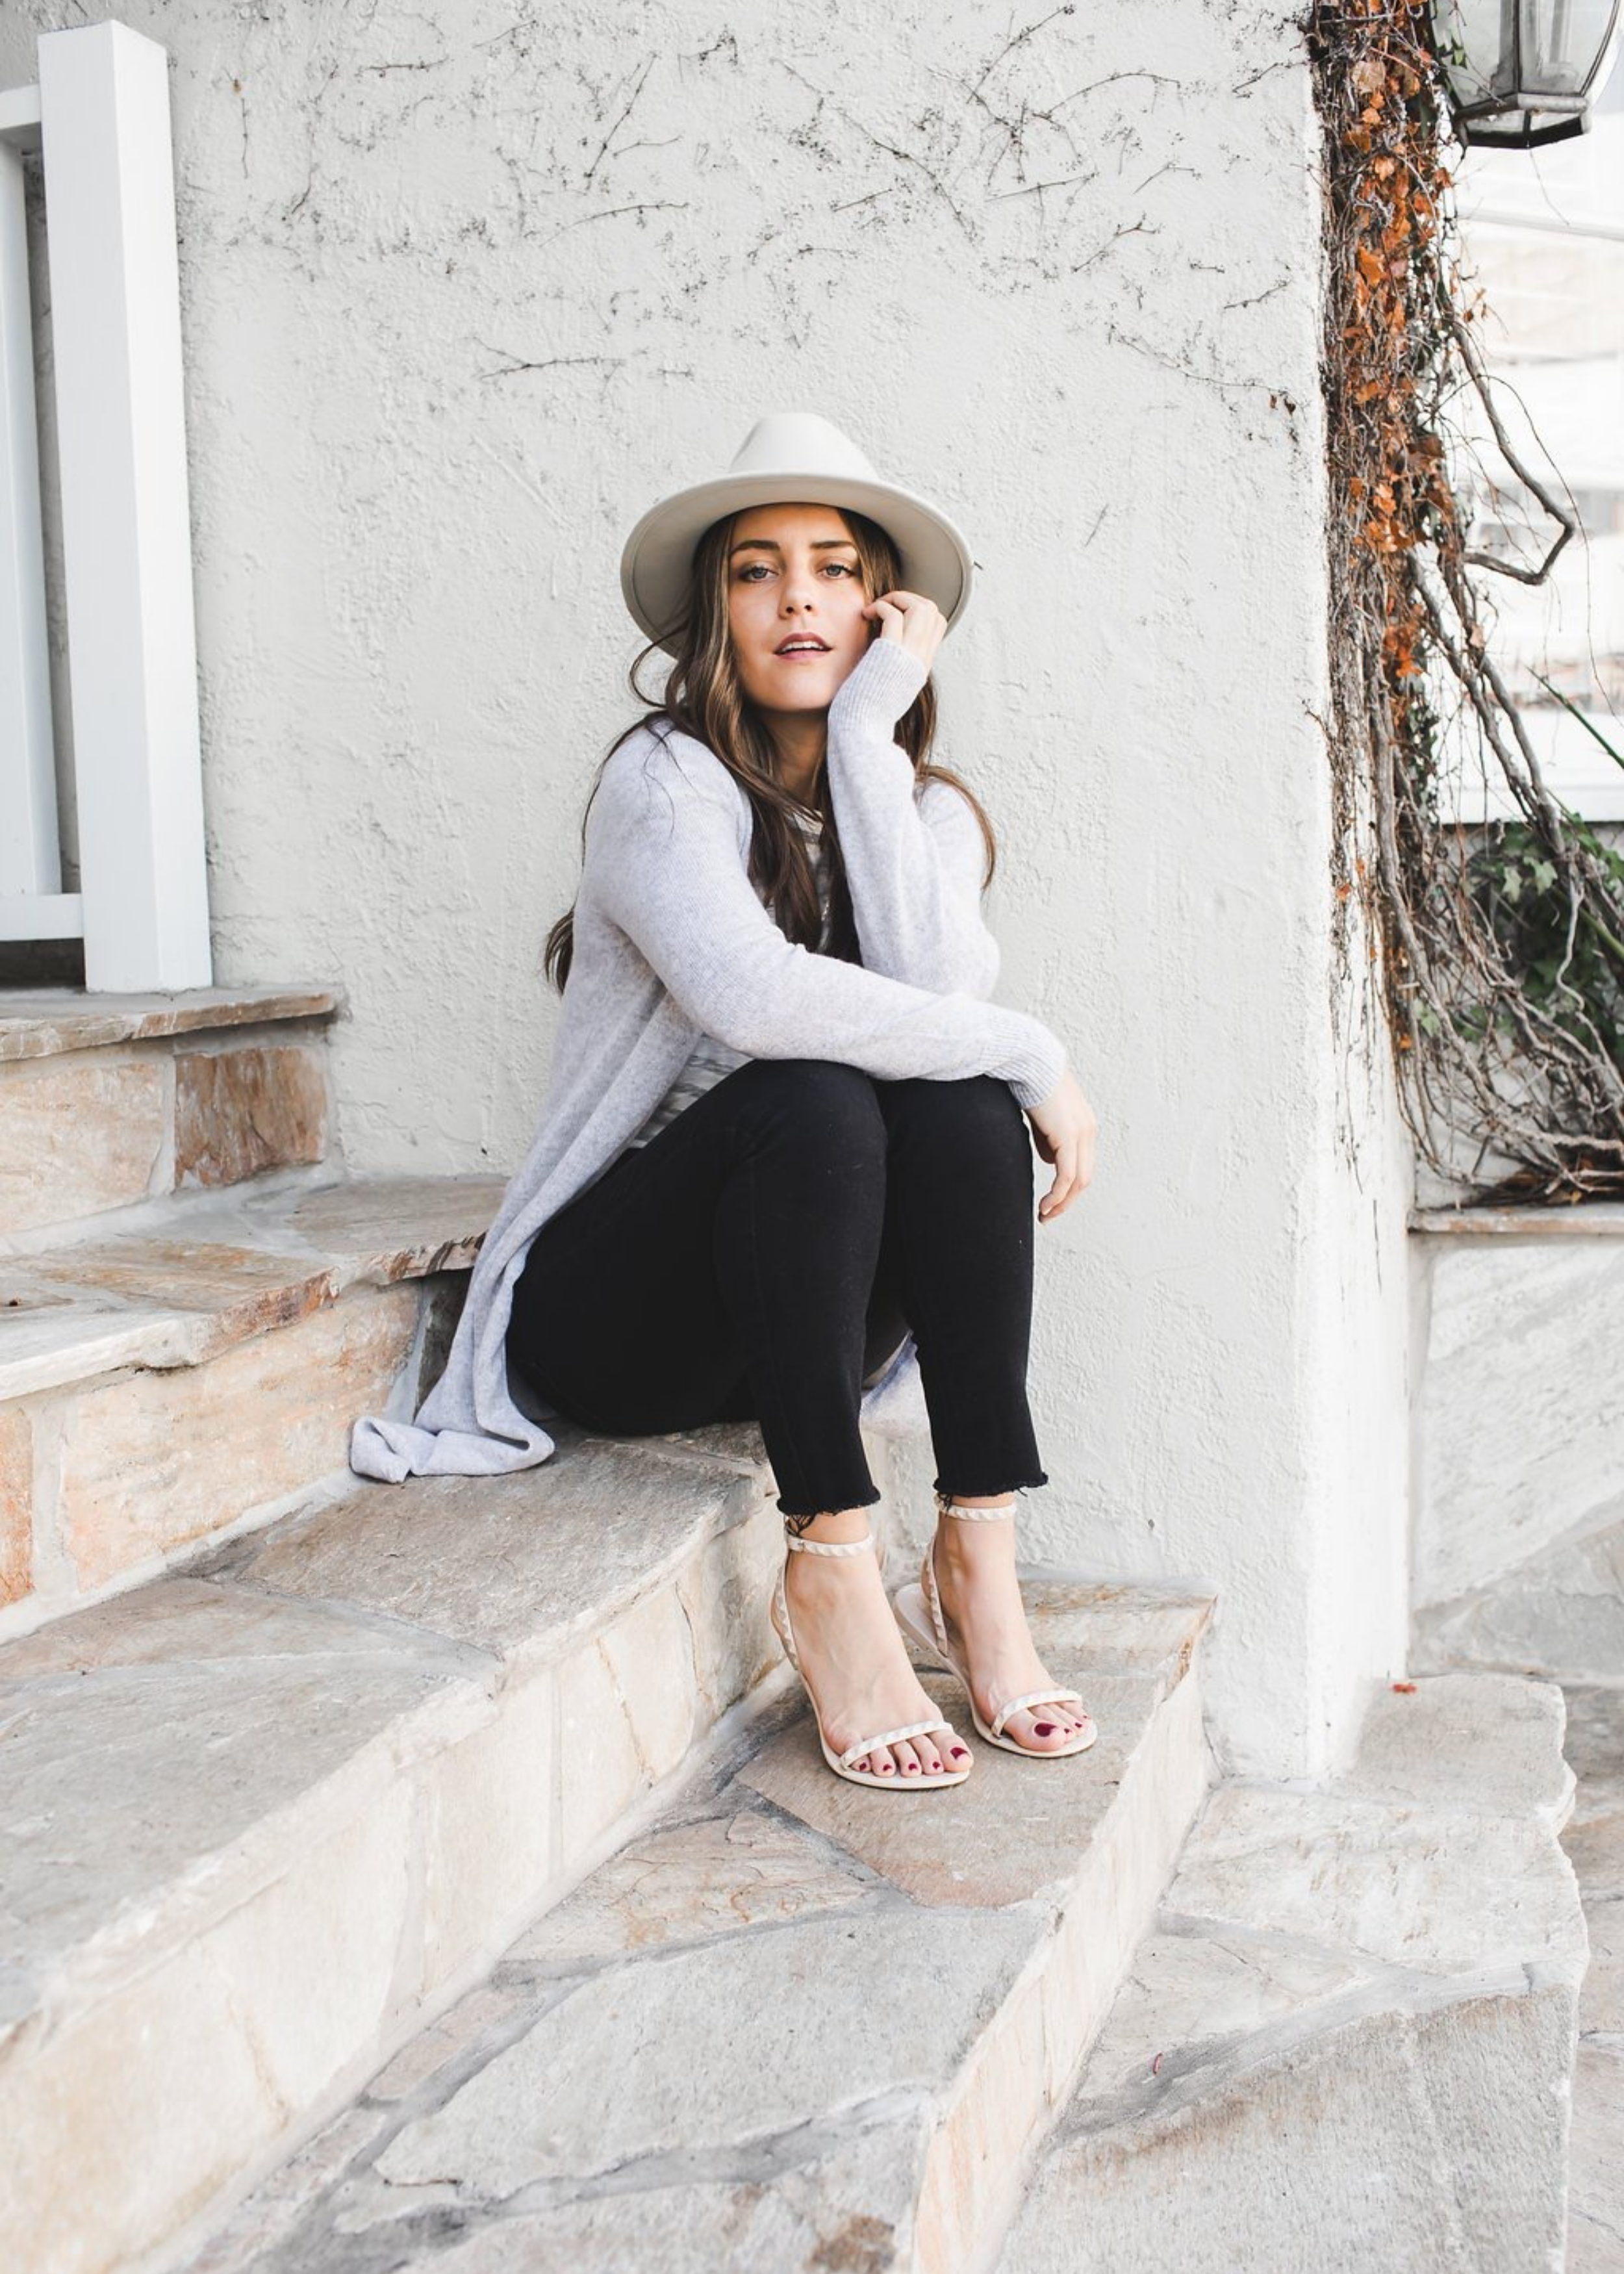 @karla_jordan3 sitting wearing Aria sandals in Nude and a cute stylish outfit.